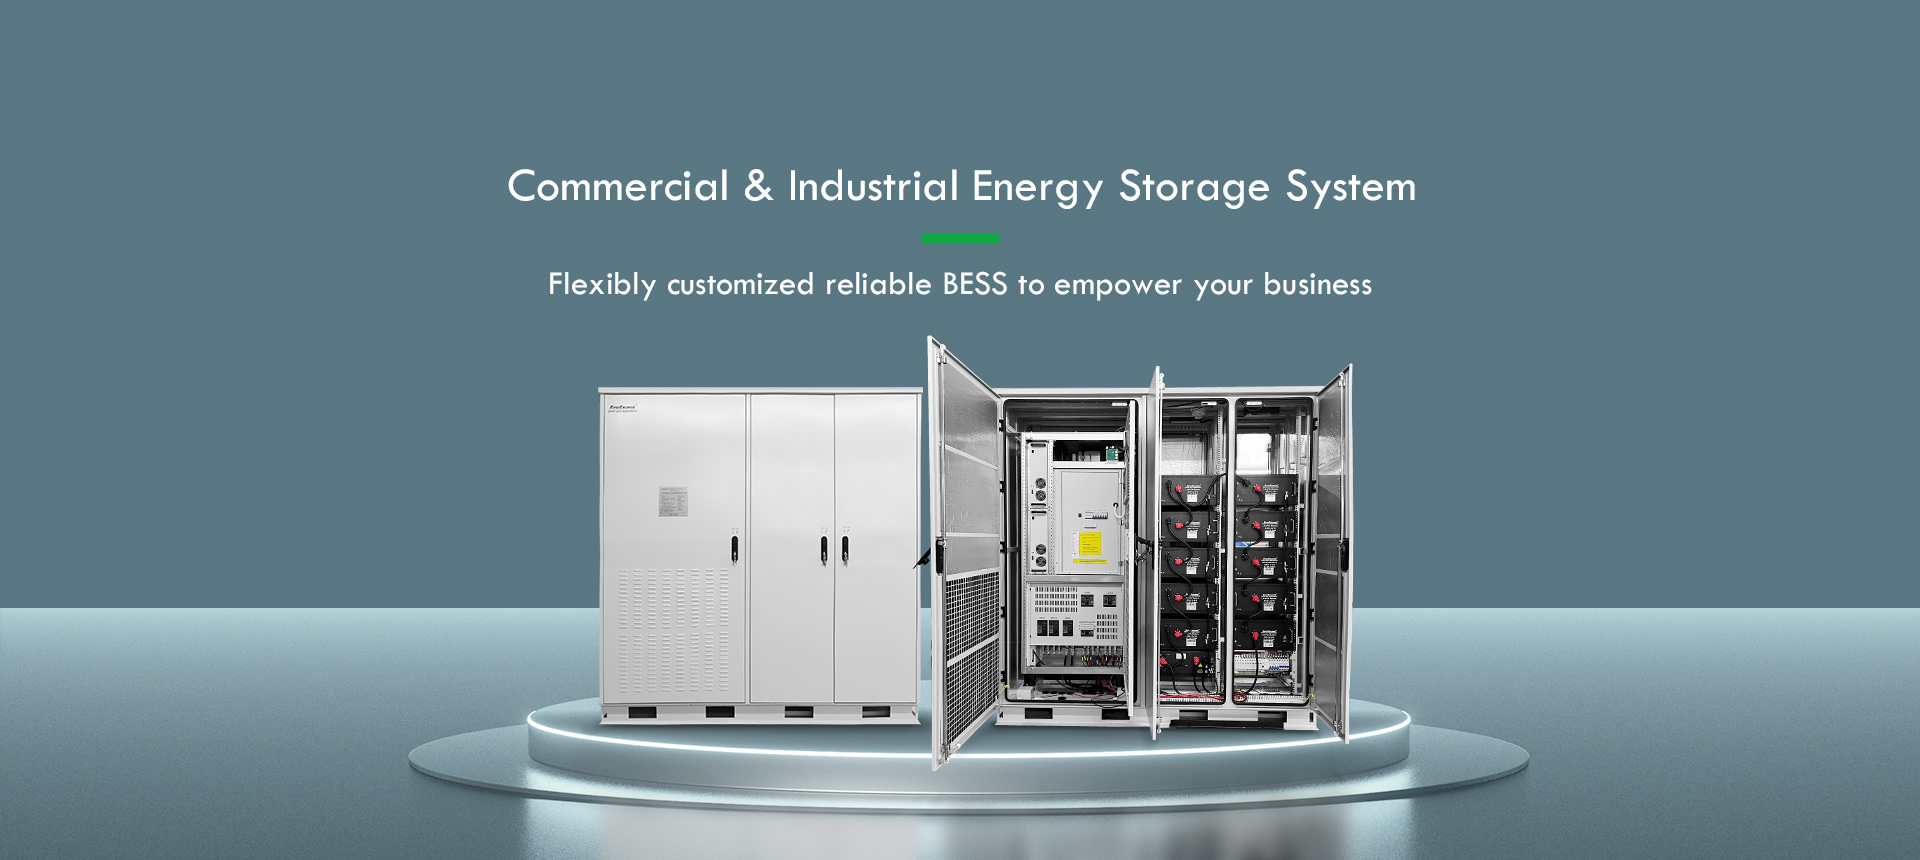 Commercial & Industrial Energy Storage System